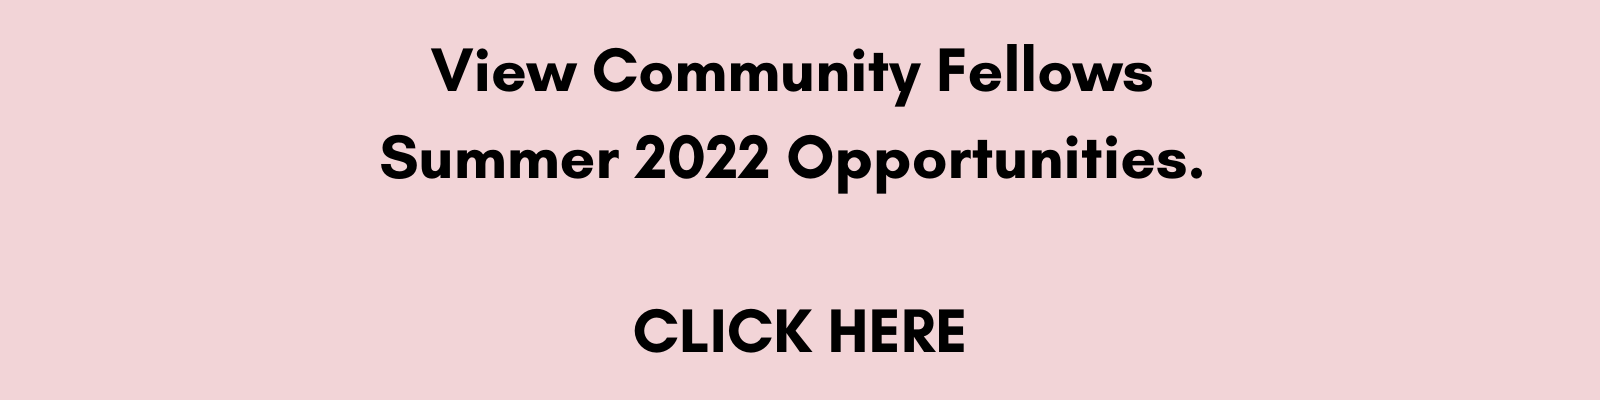 Click here to view summer 2022 Community Fellows Opportunities